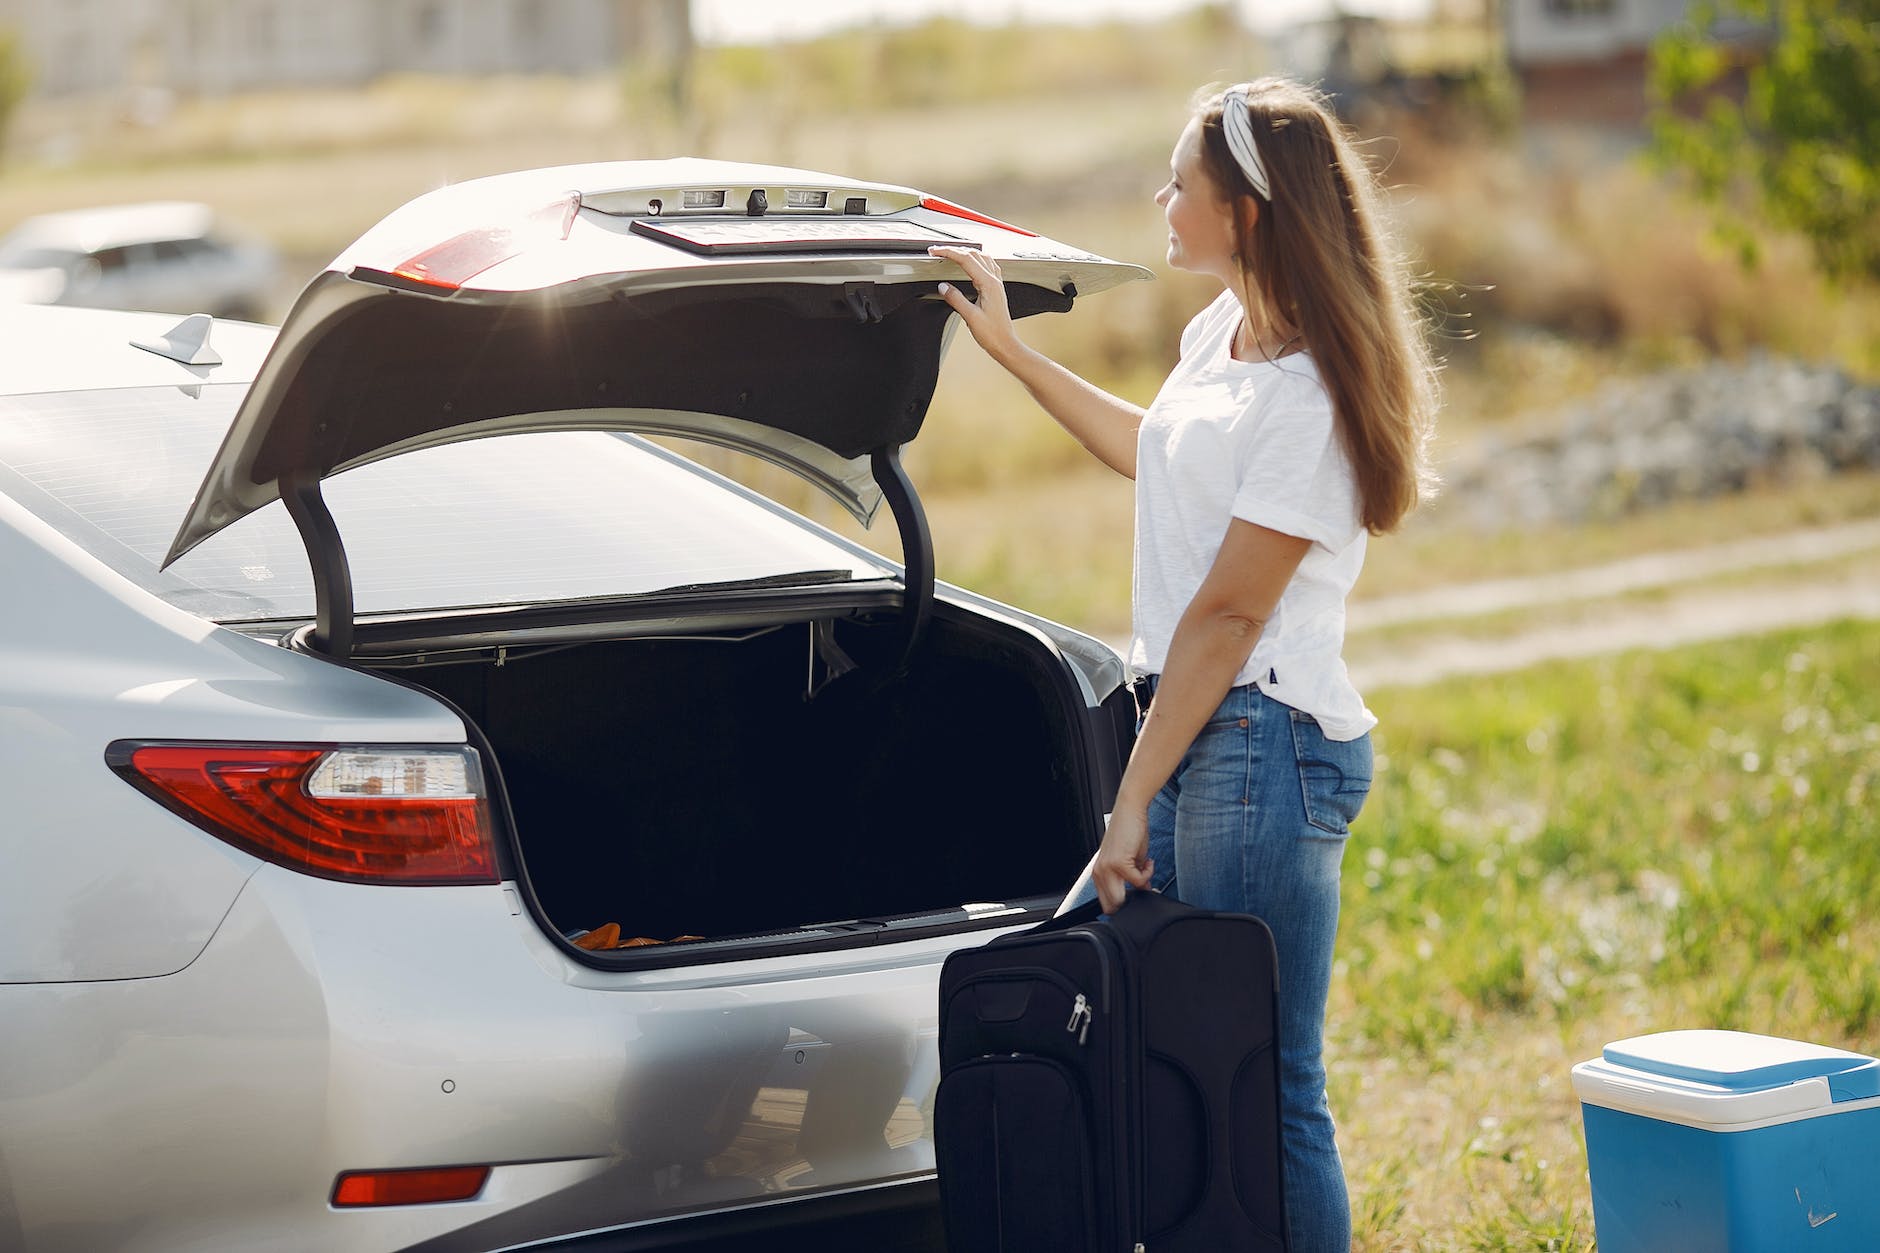 smiling young woman with luggage near automobile during car trip in nature